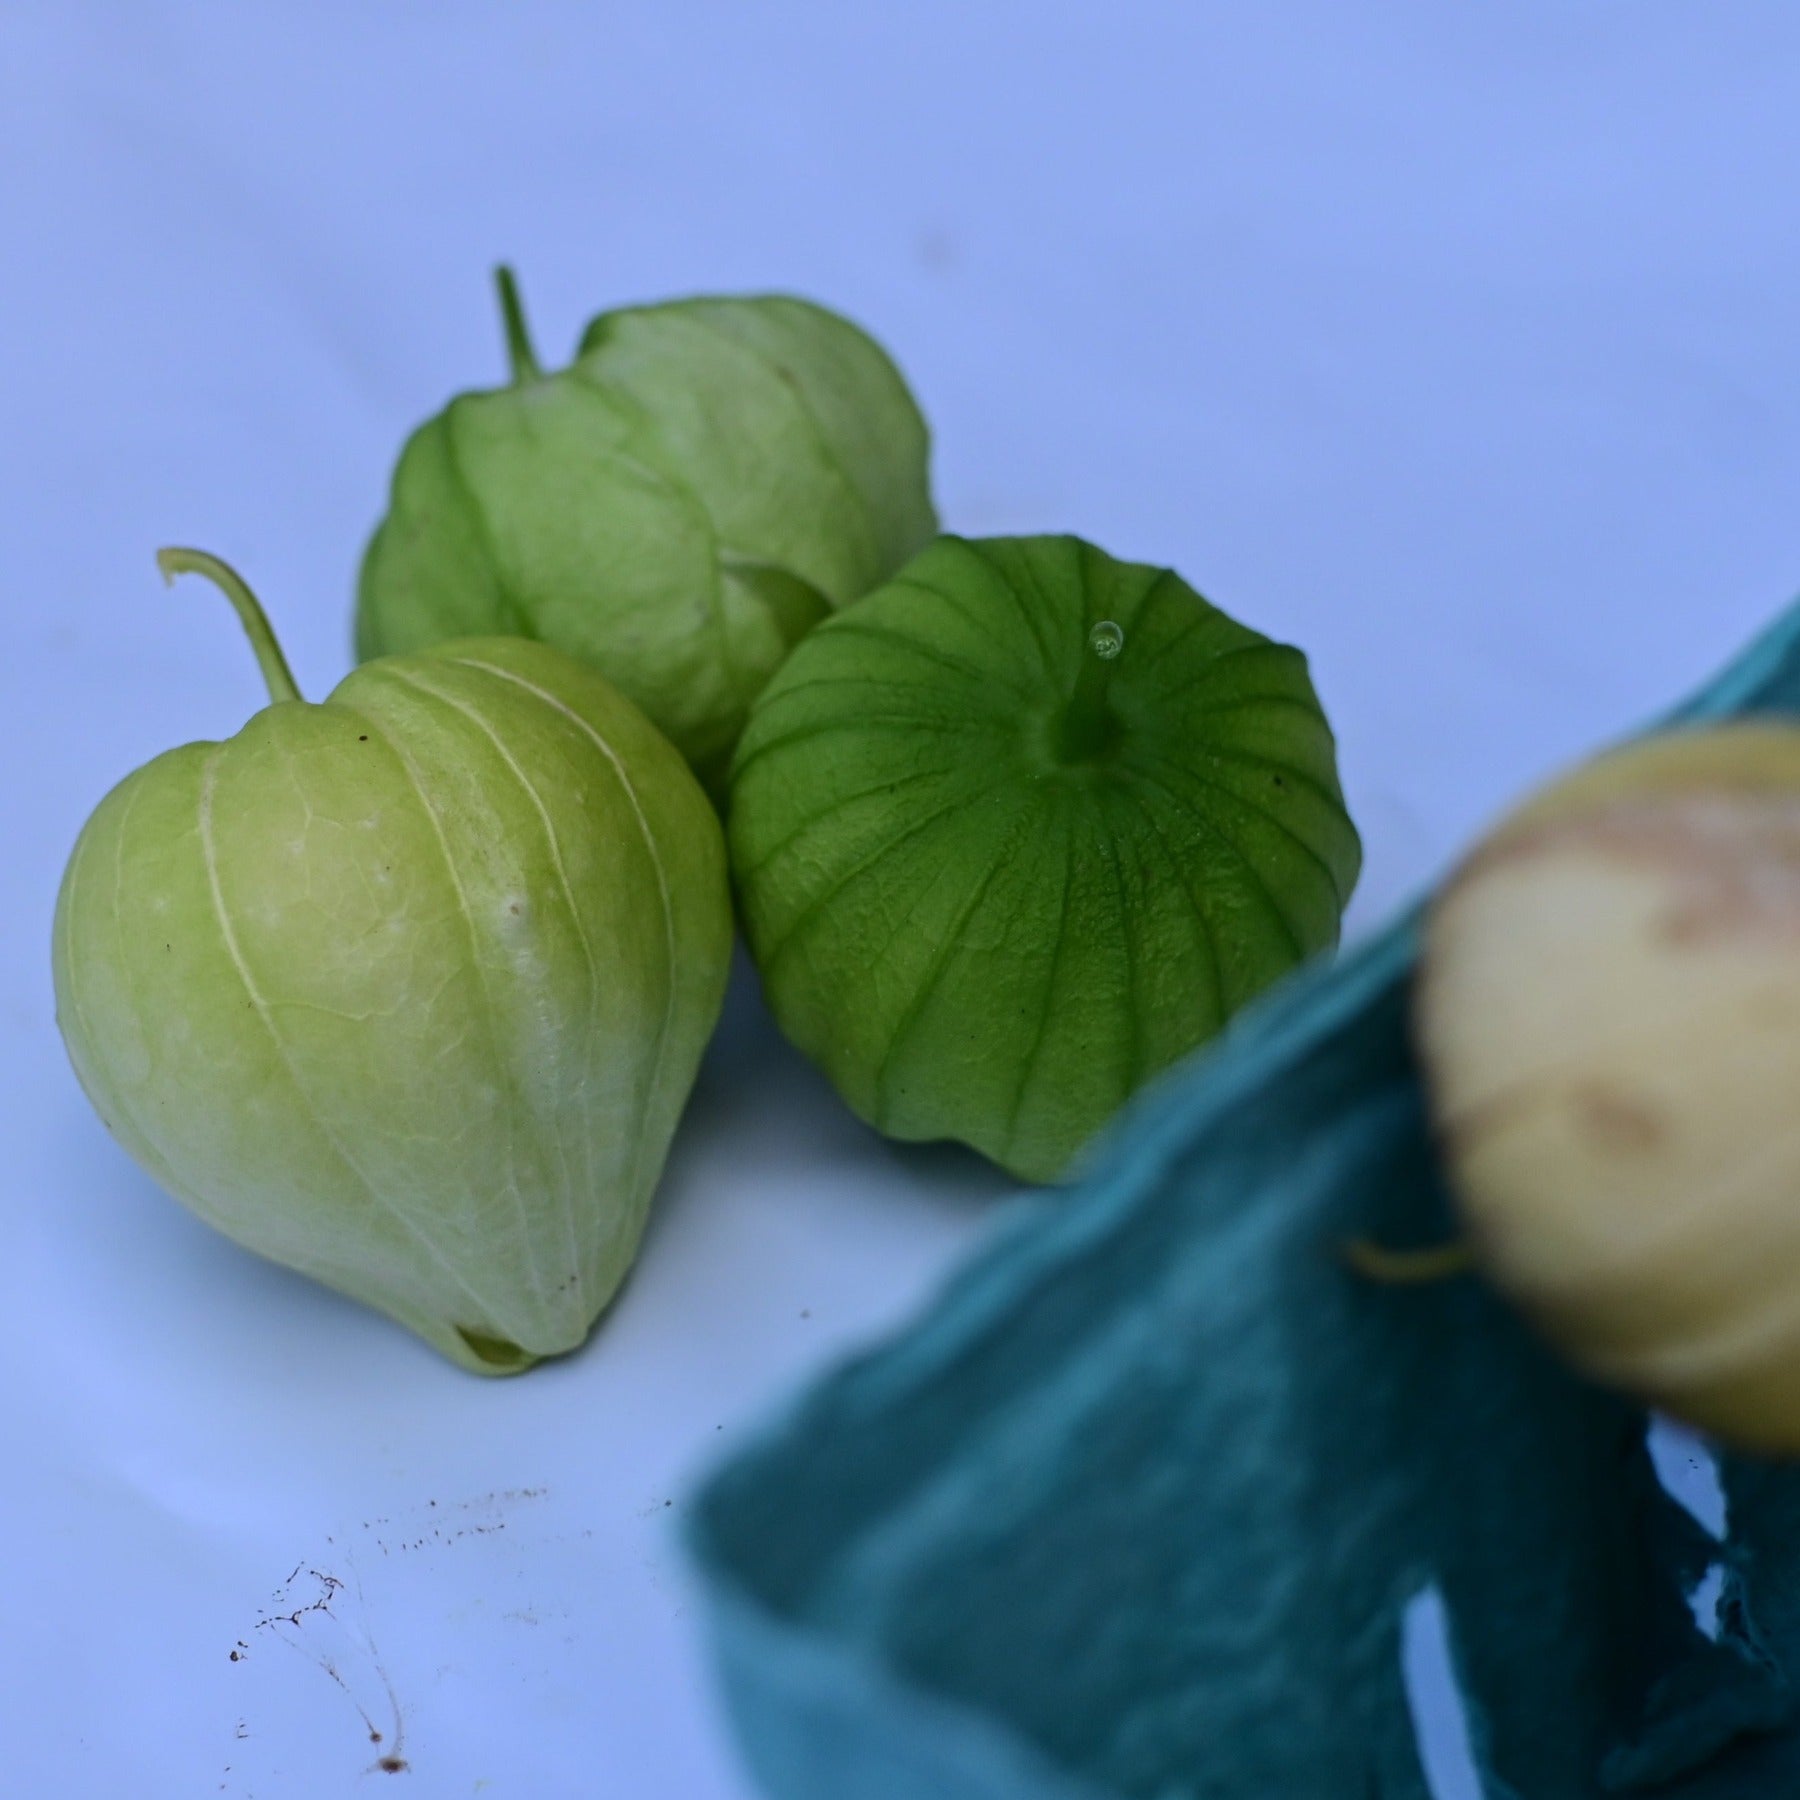 Group of three tomatillo verde fruits next to a pint container against a white background